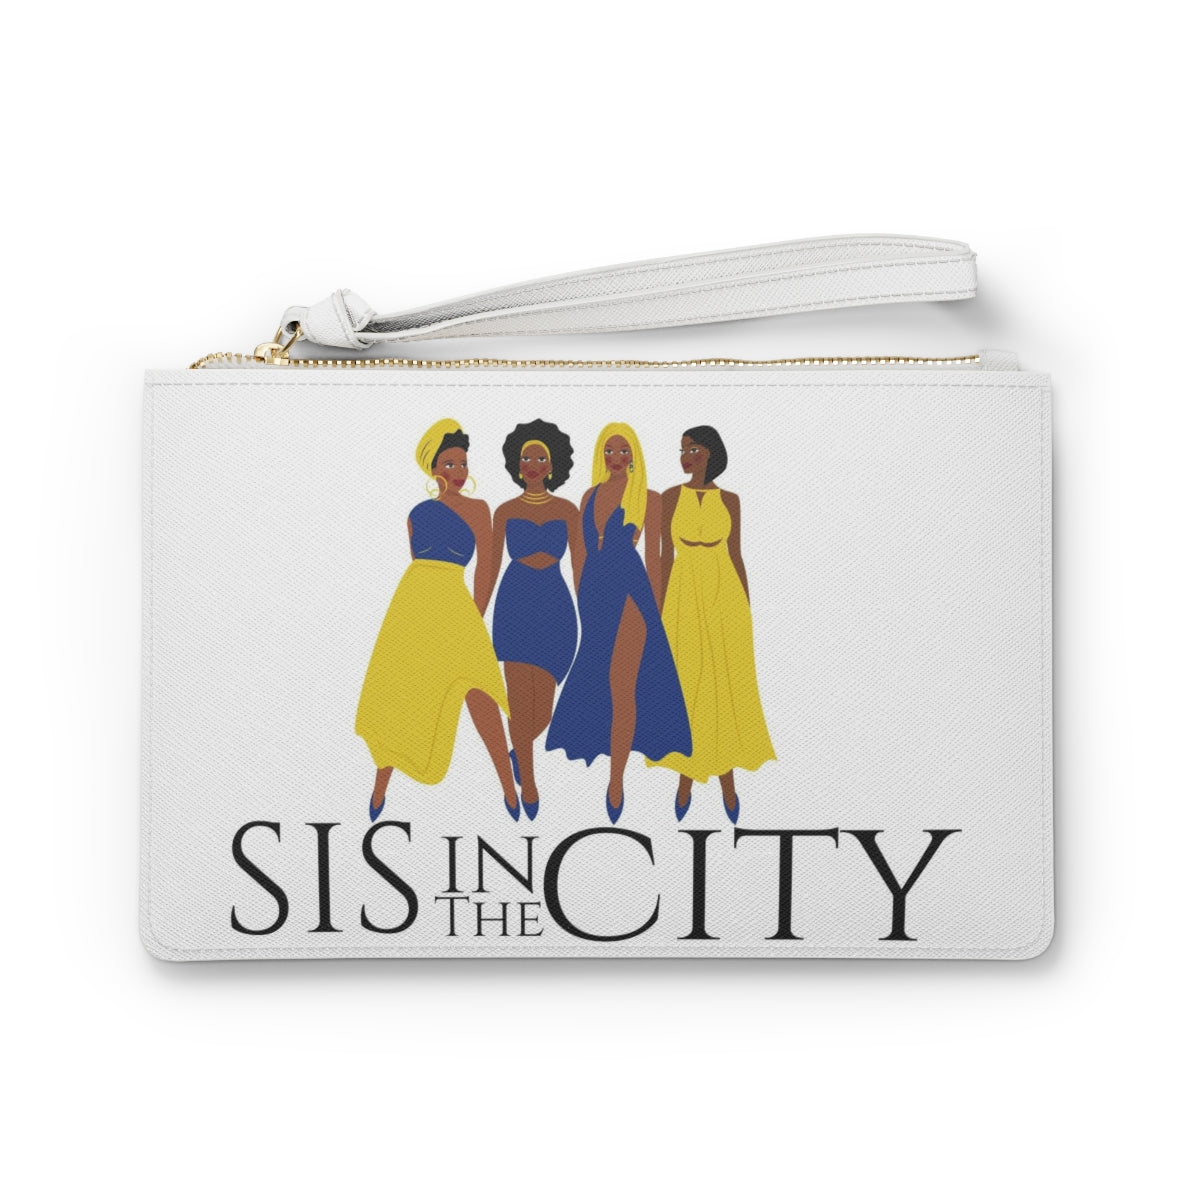 "Sis In The City" SGR Clutch Bag